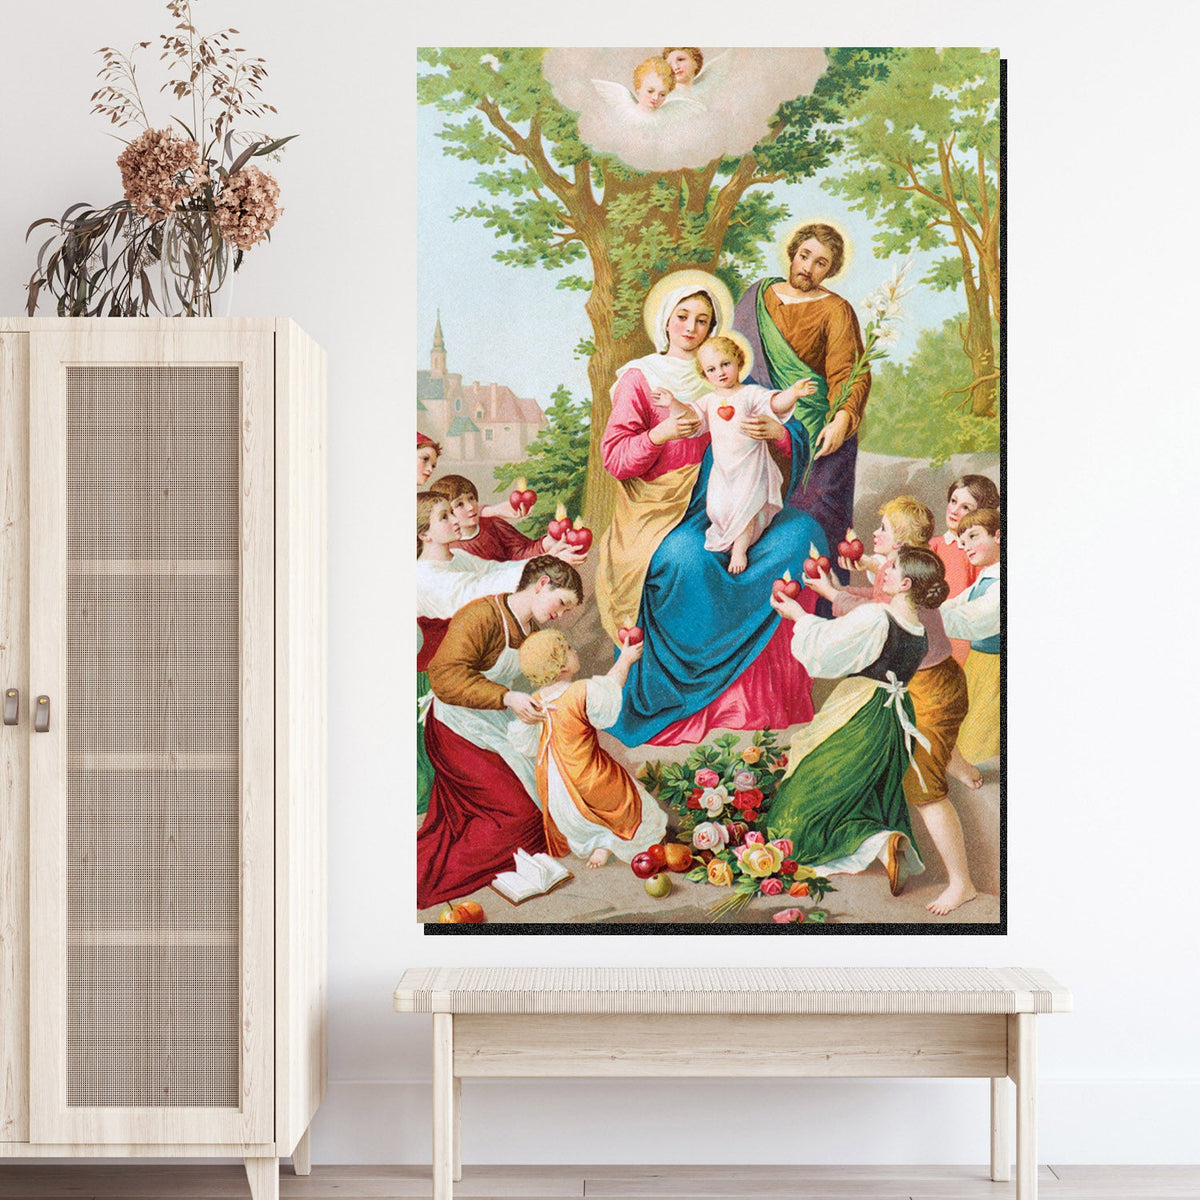 https://cdn.shopify.com/s/files/1/0387/9986/8044/products/TheBlessedHolyFamilyCanvasArtprintStretched-4.jpg